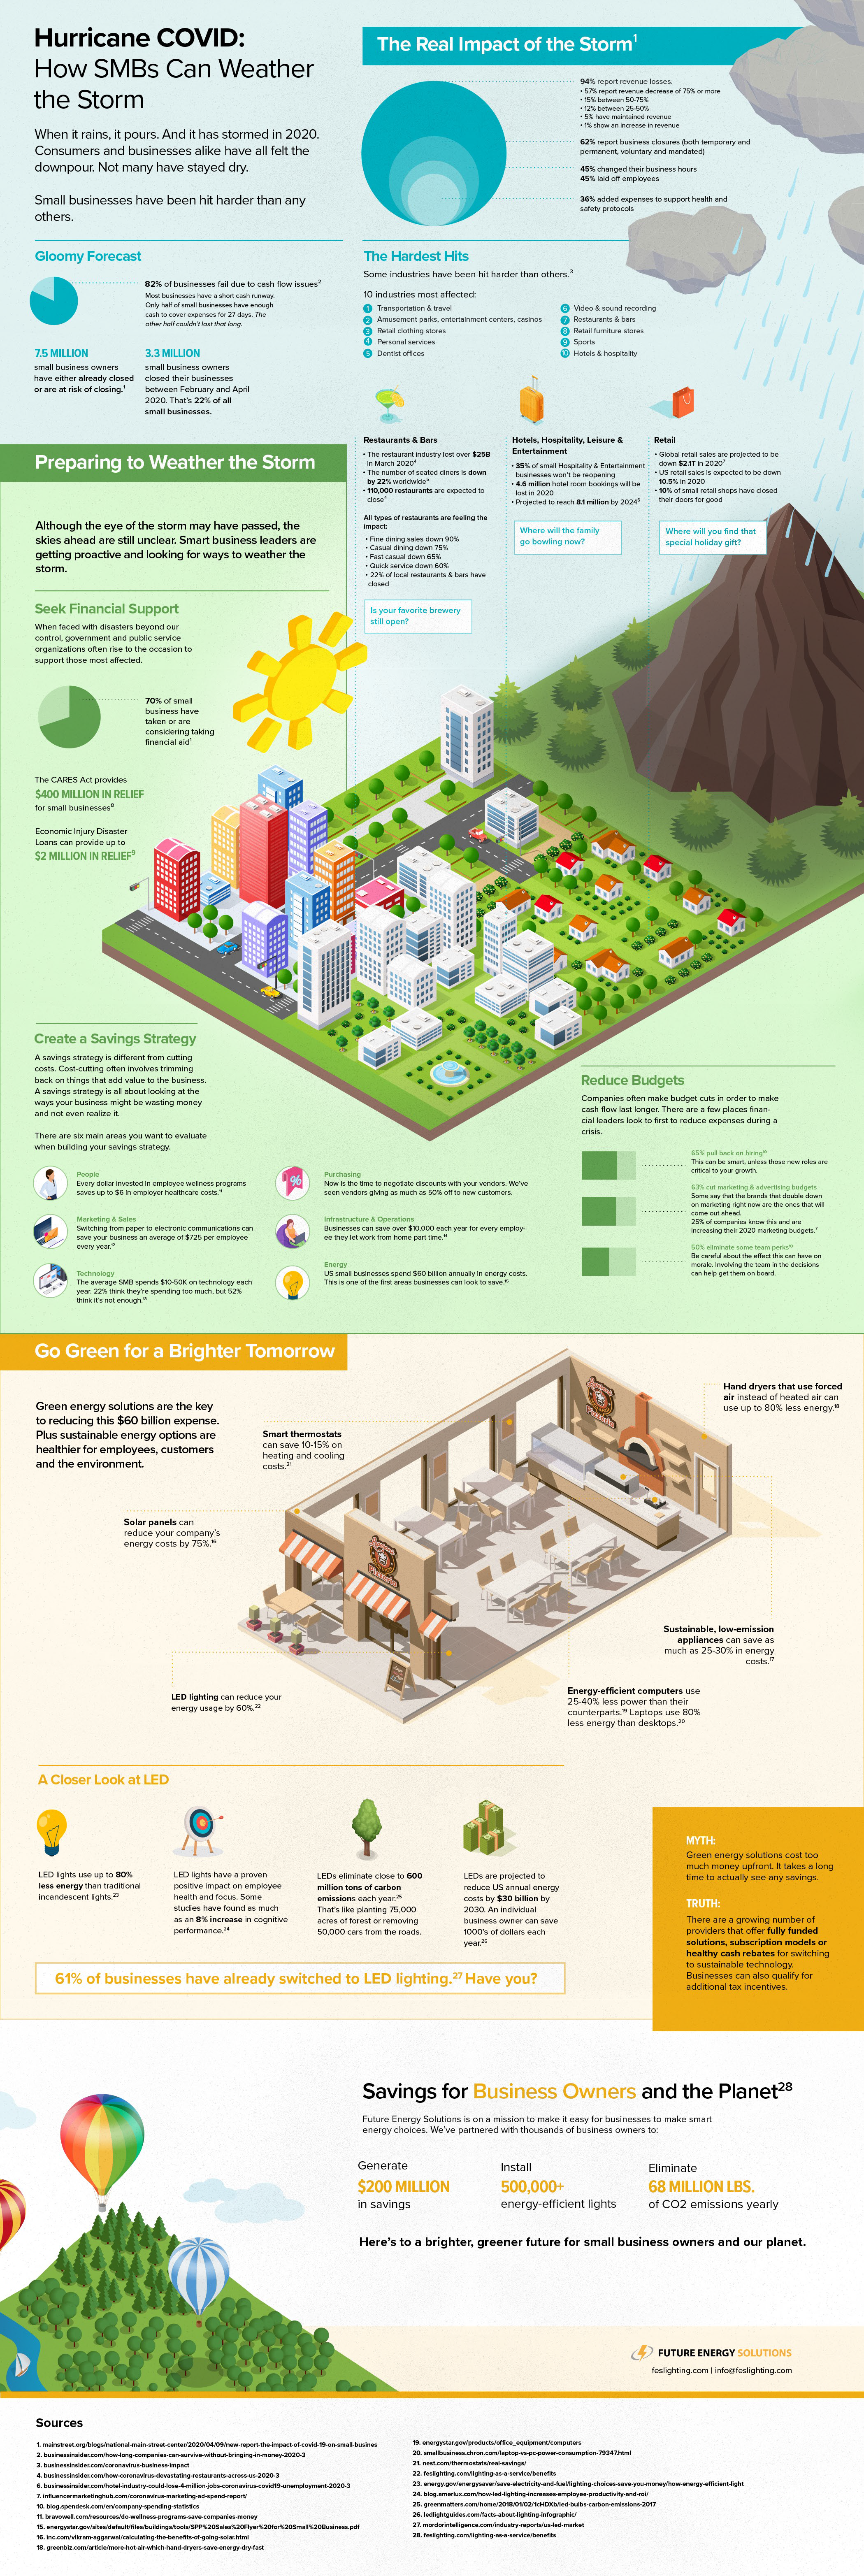 covid-19 business impact infographic